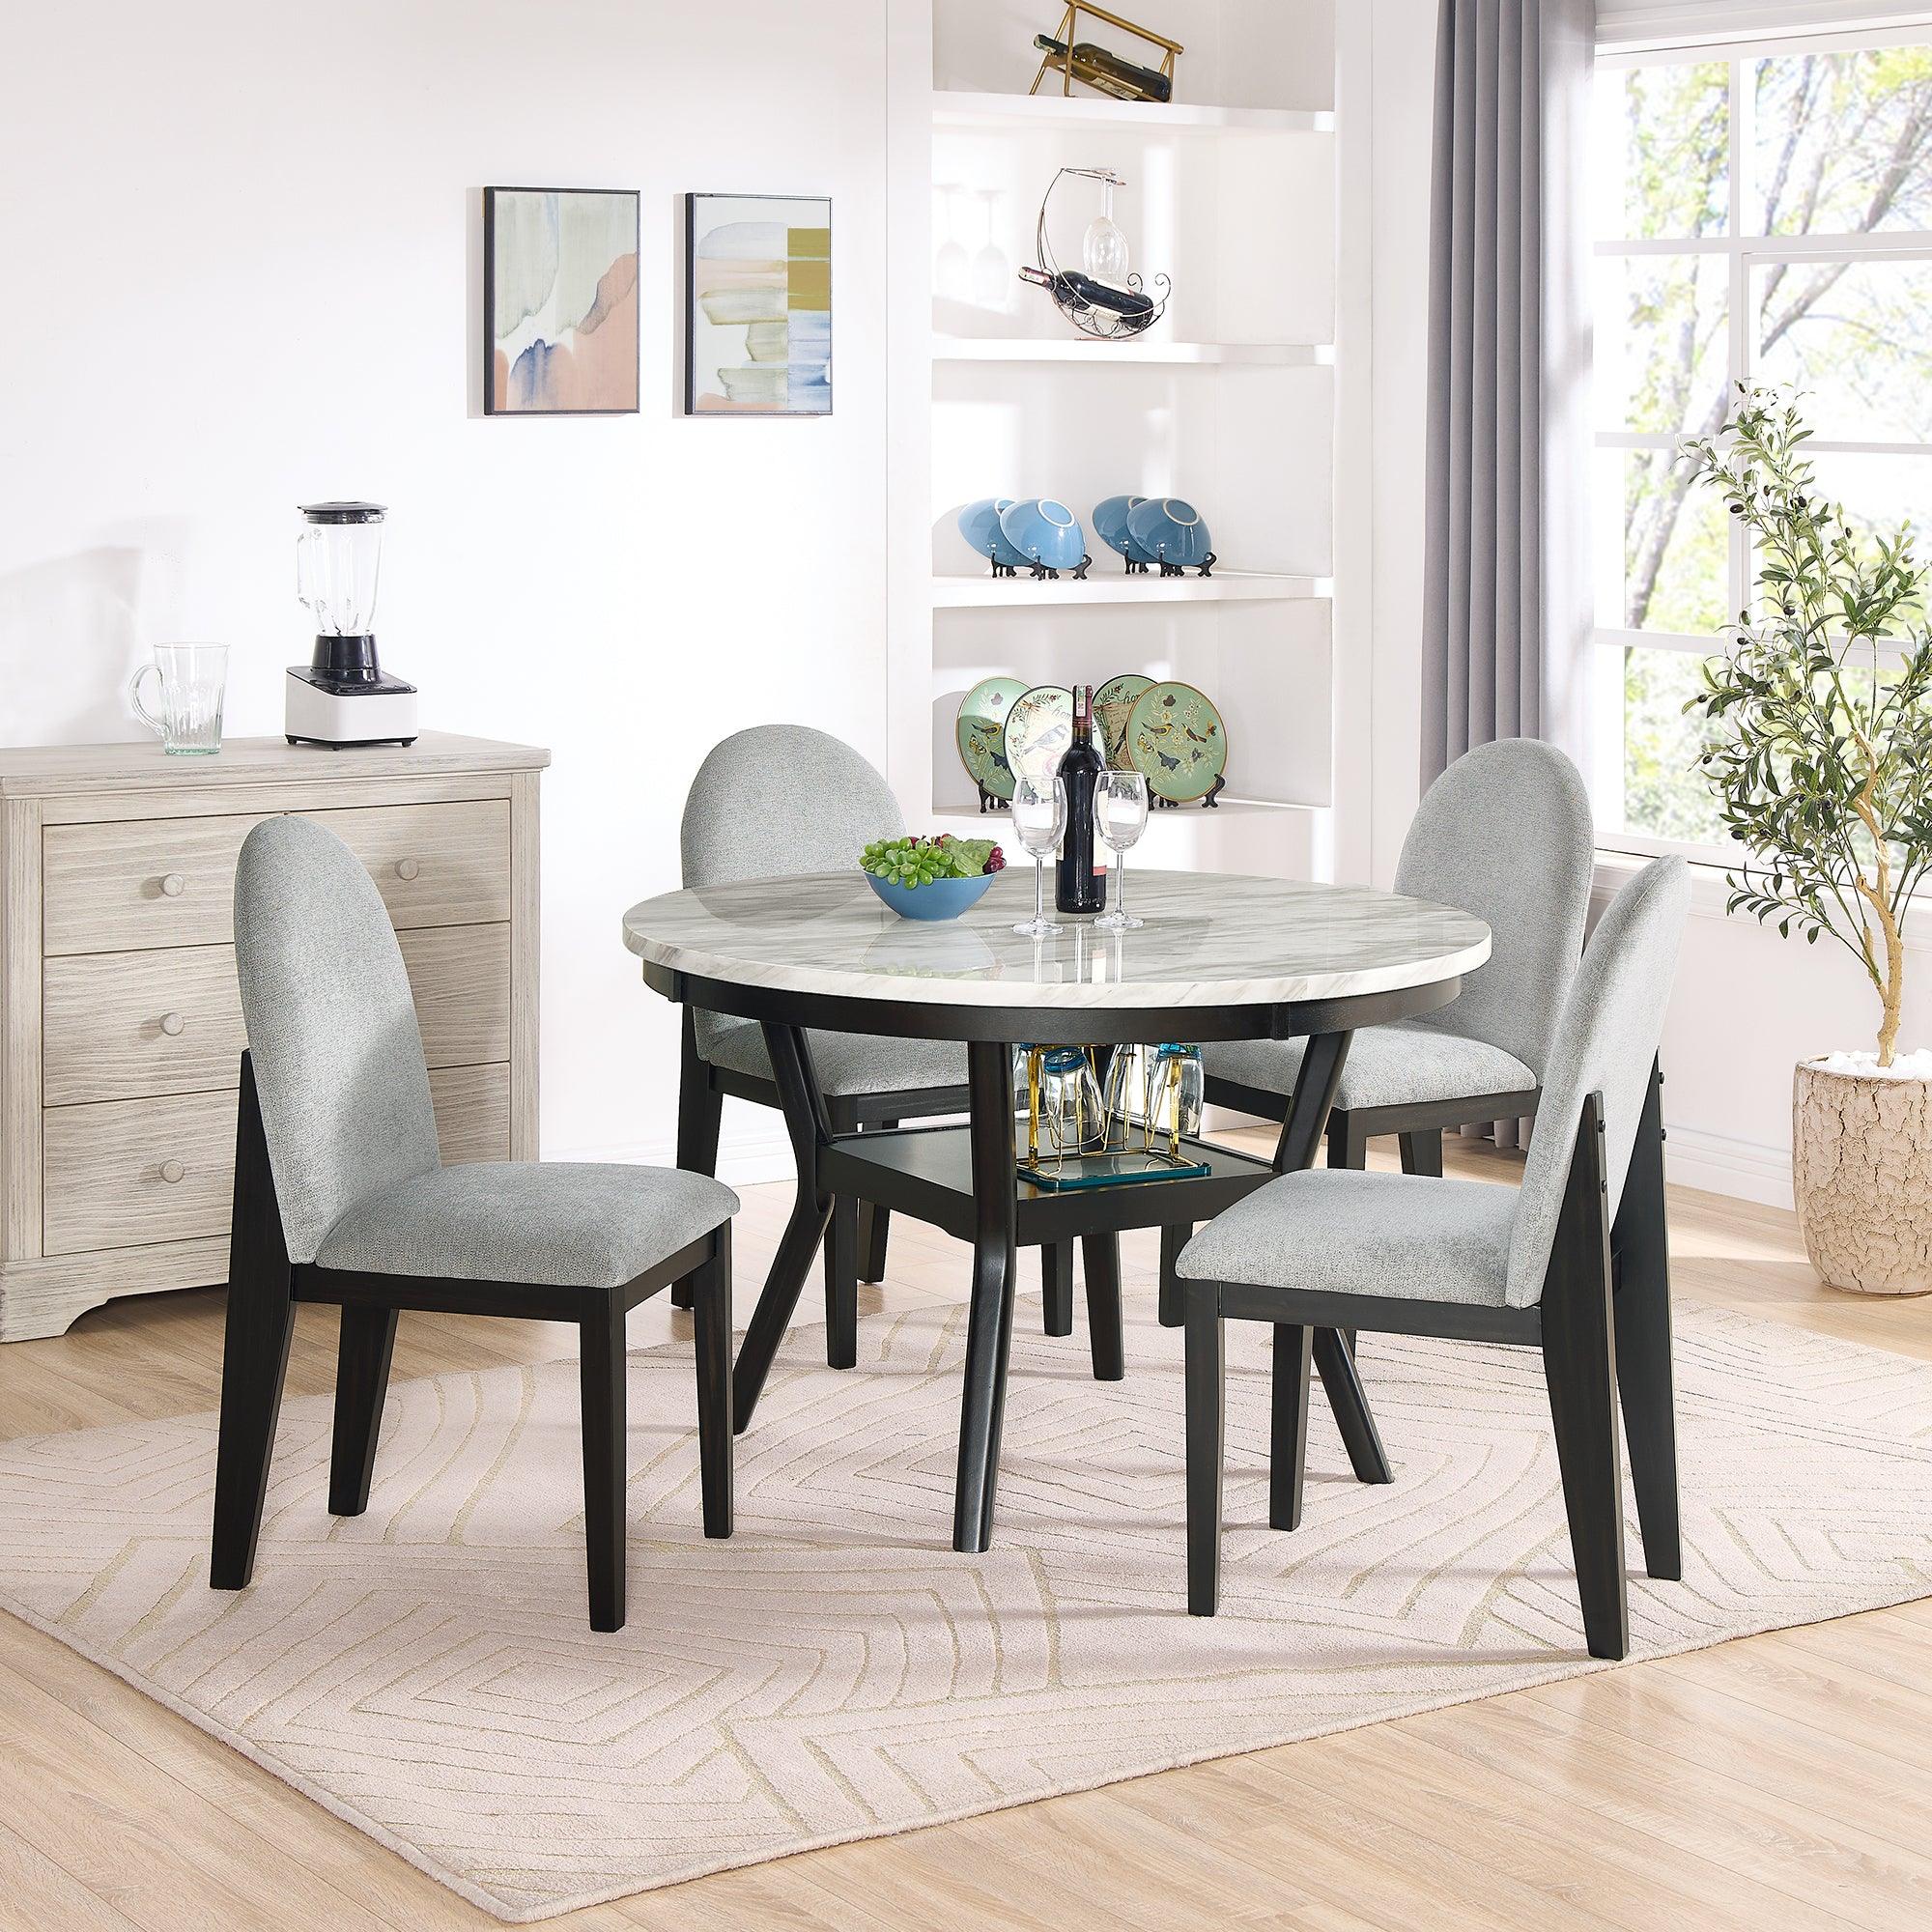 🆓🚛 5 Piece Dining Table & Chair Set, Round Dining Table With 4 Upholstered Chairs